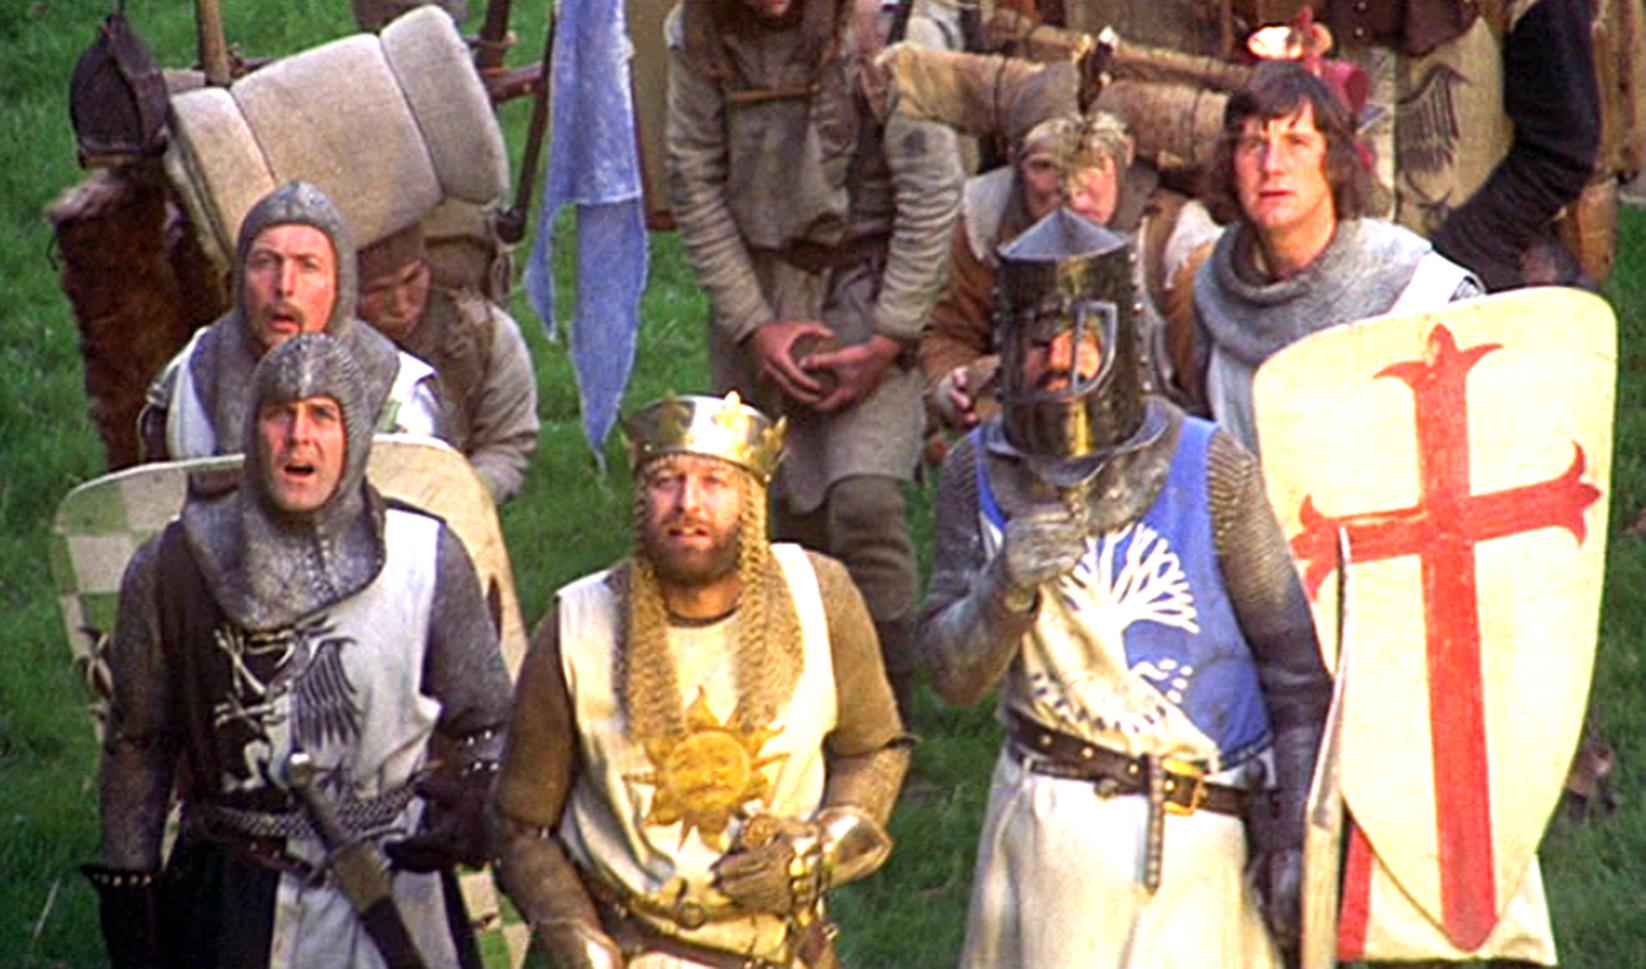 1646x969px 940.87 KB Monty Python And The Holy Grail